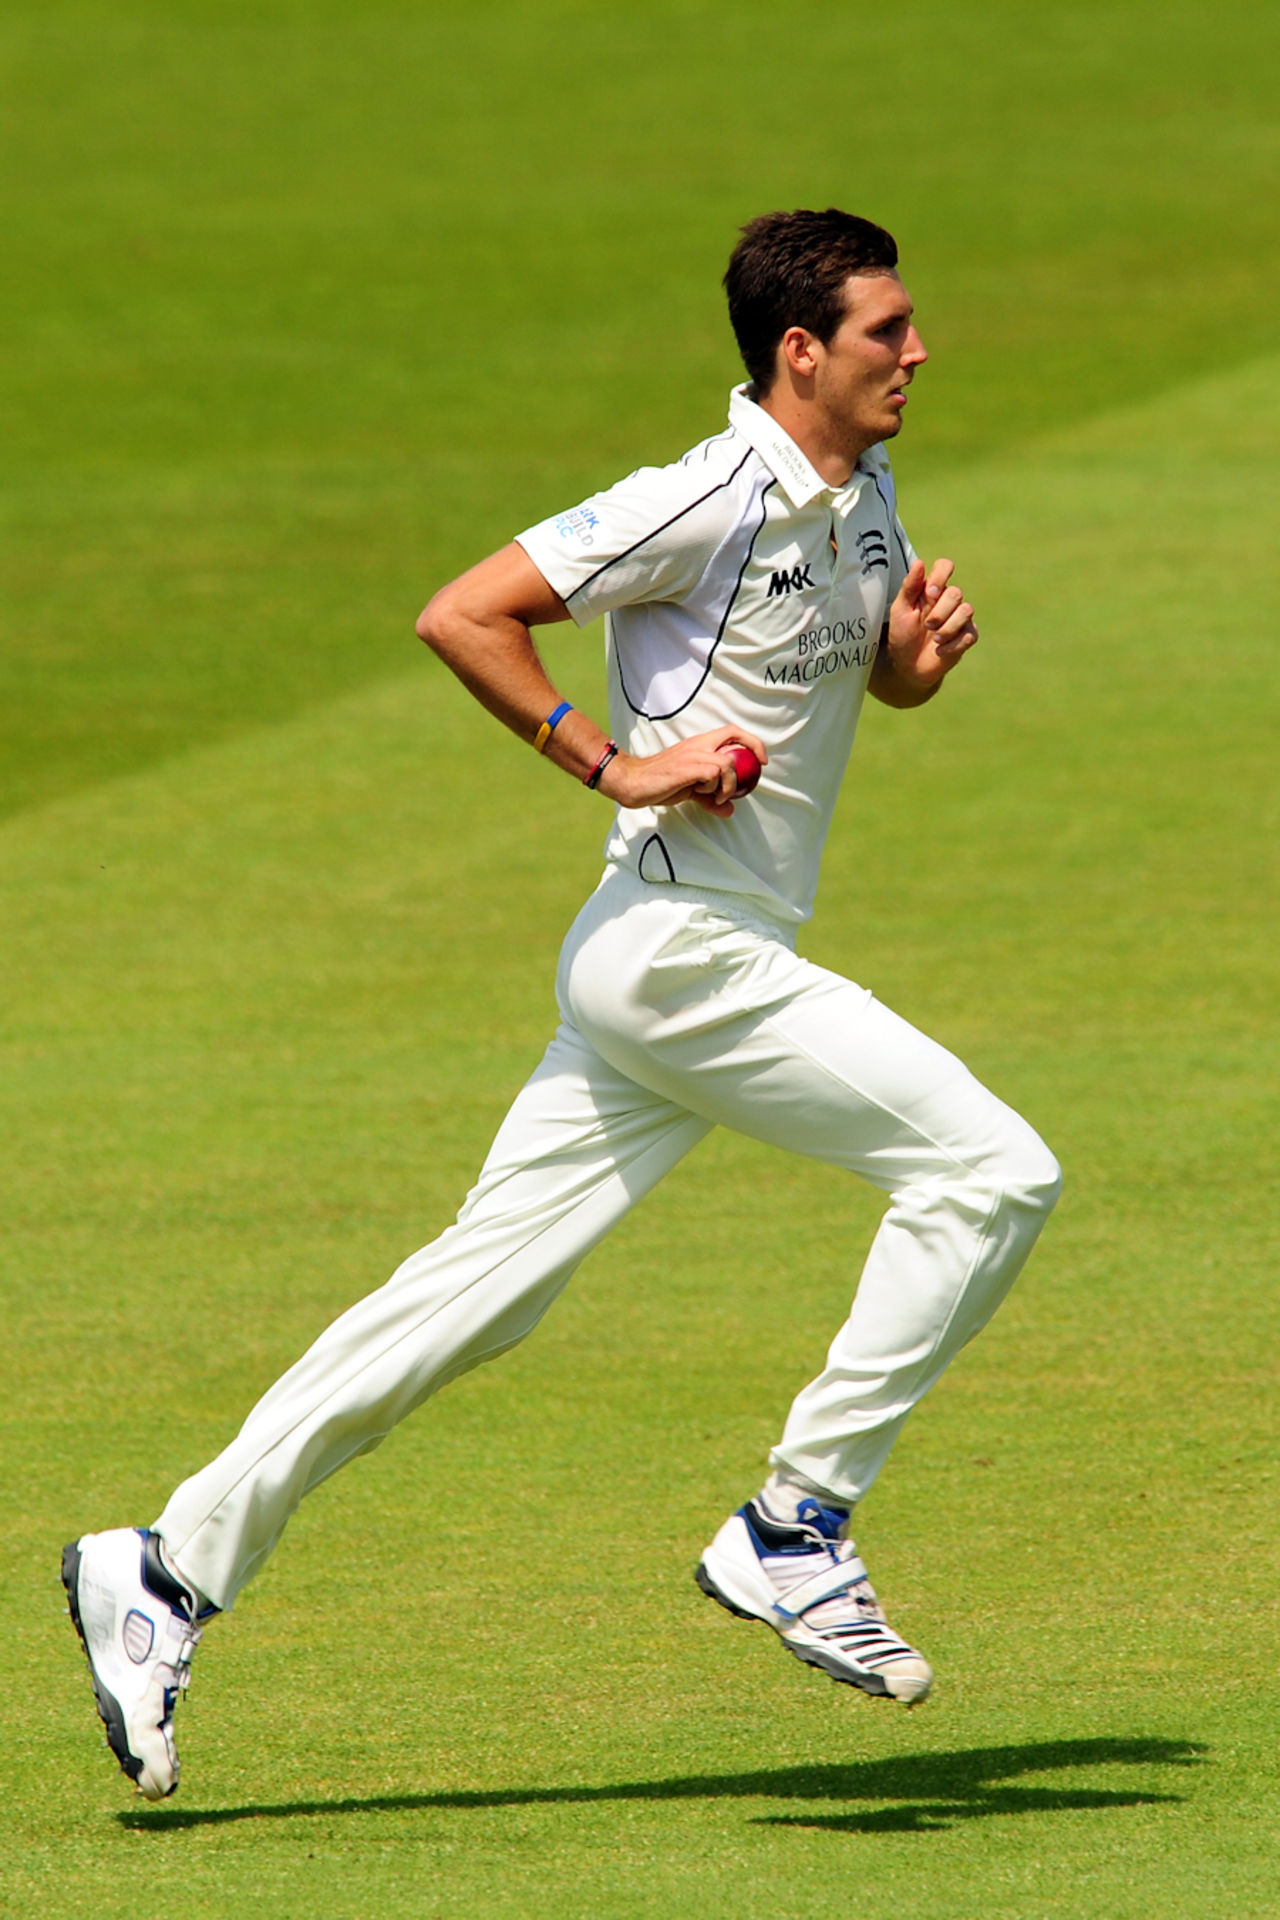 Steve Finn runs in for Middlesex, Middlesex v Sussex, Specsavers Championship Division Two, Lord's, 30 May, 2012